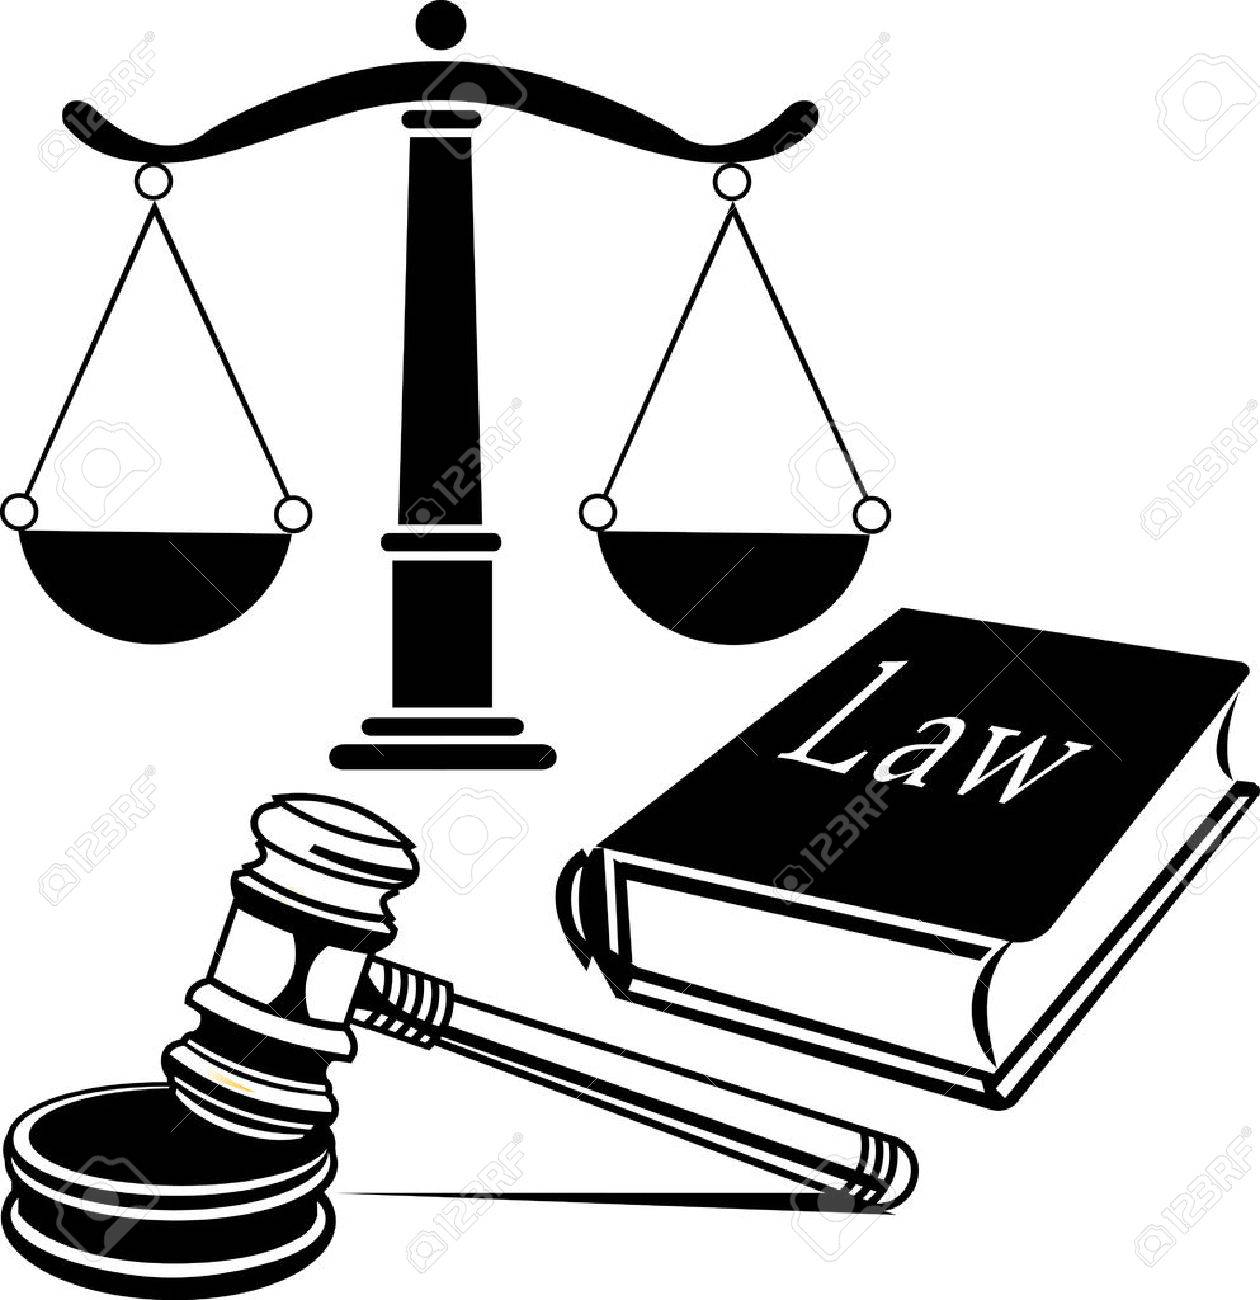 laws clipart black and white